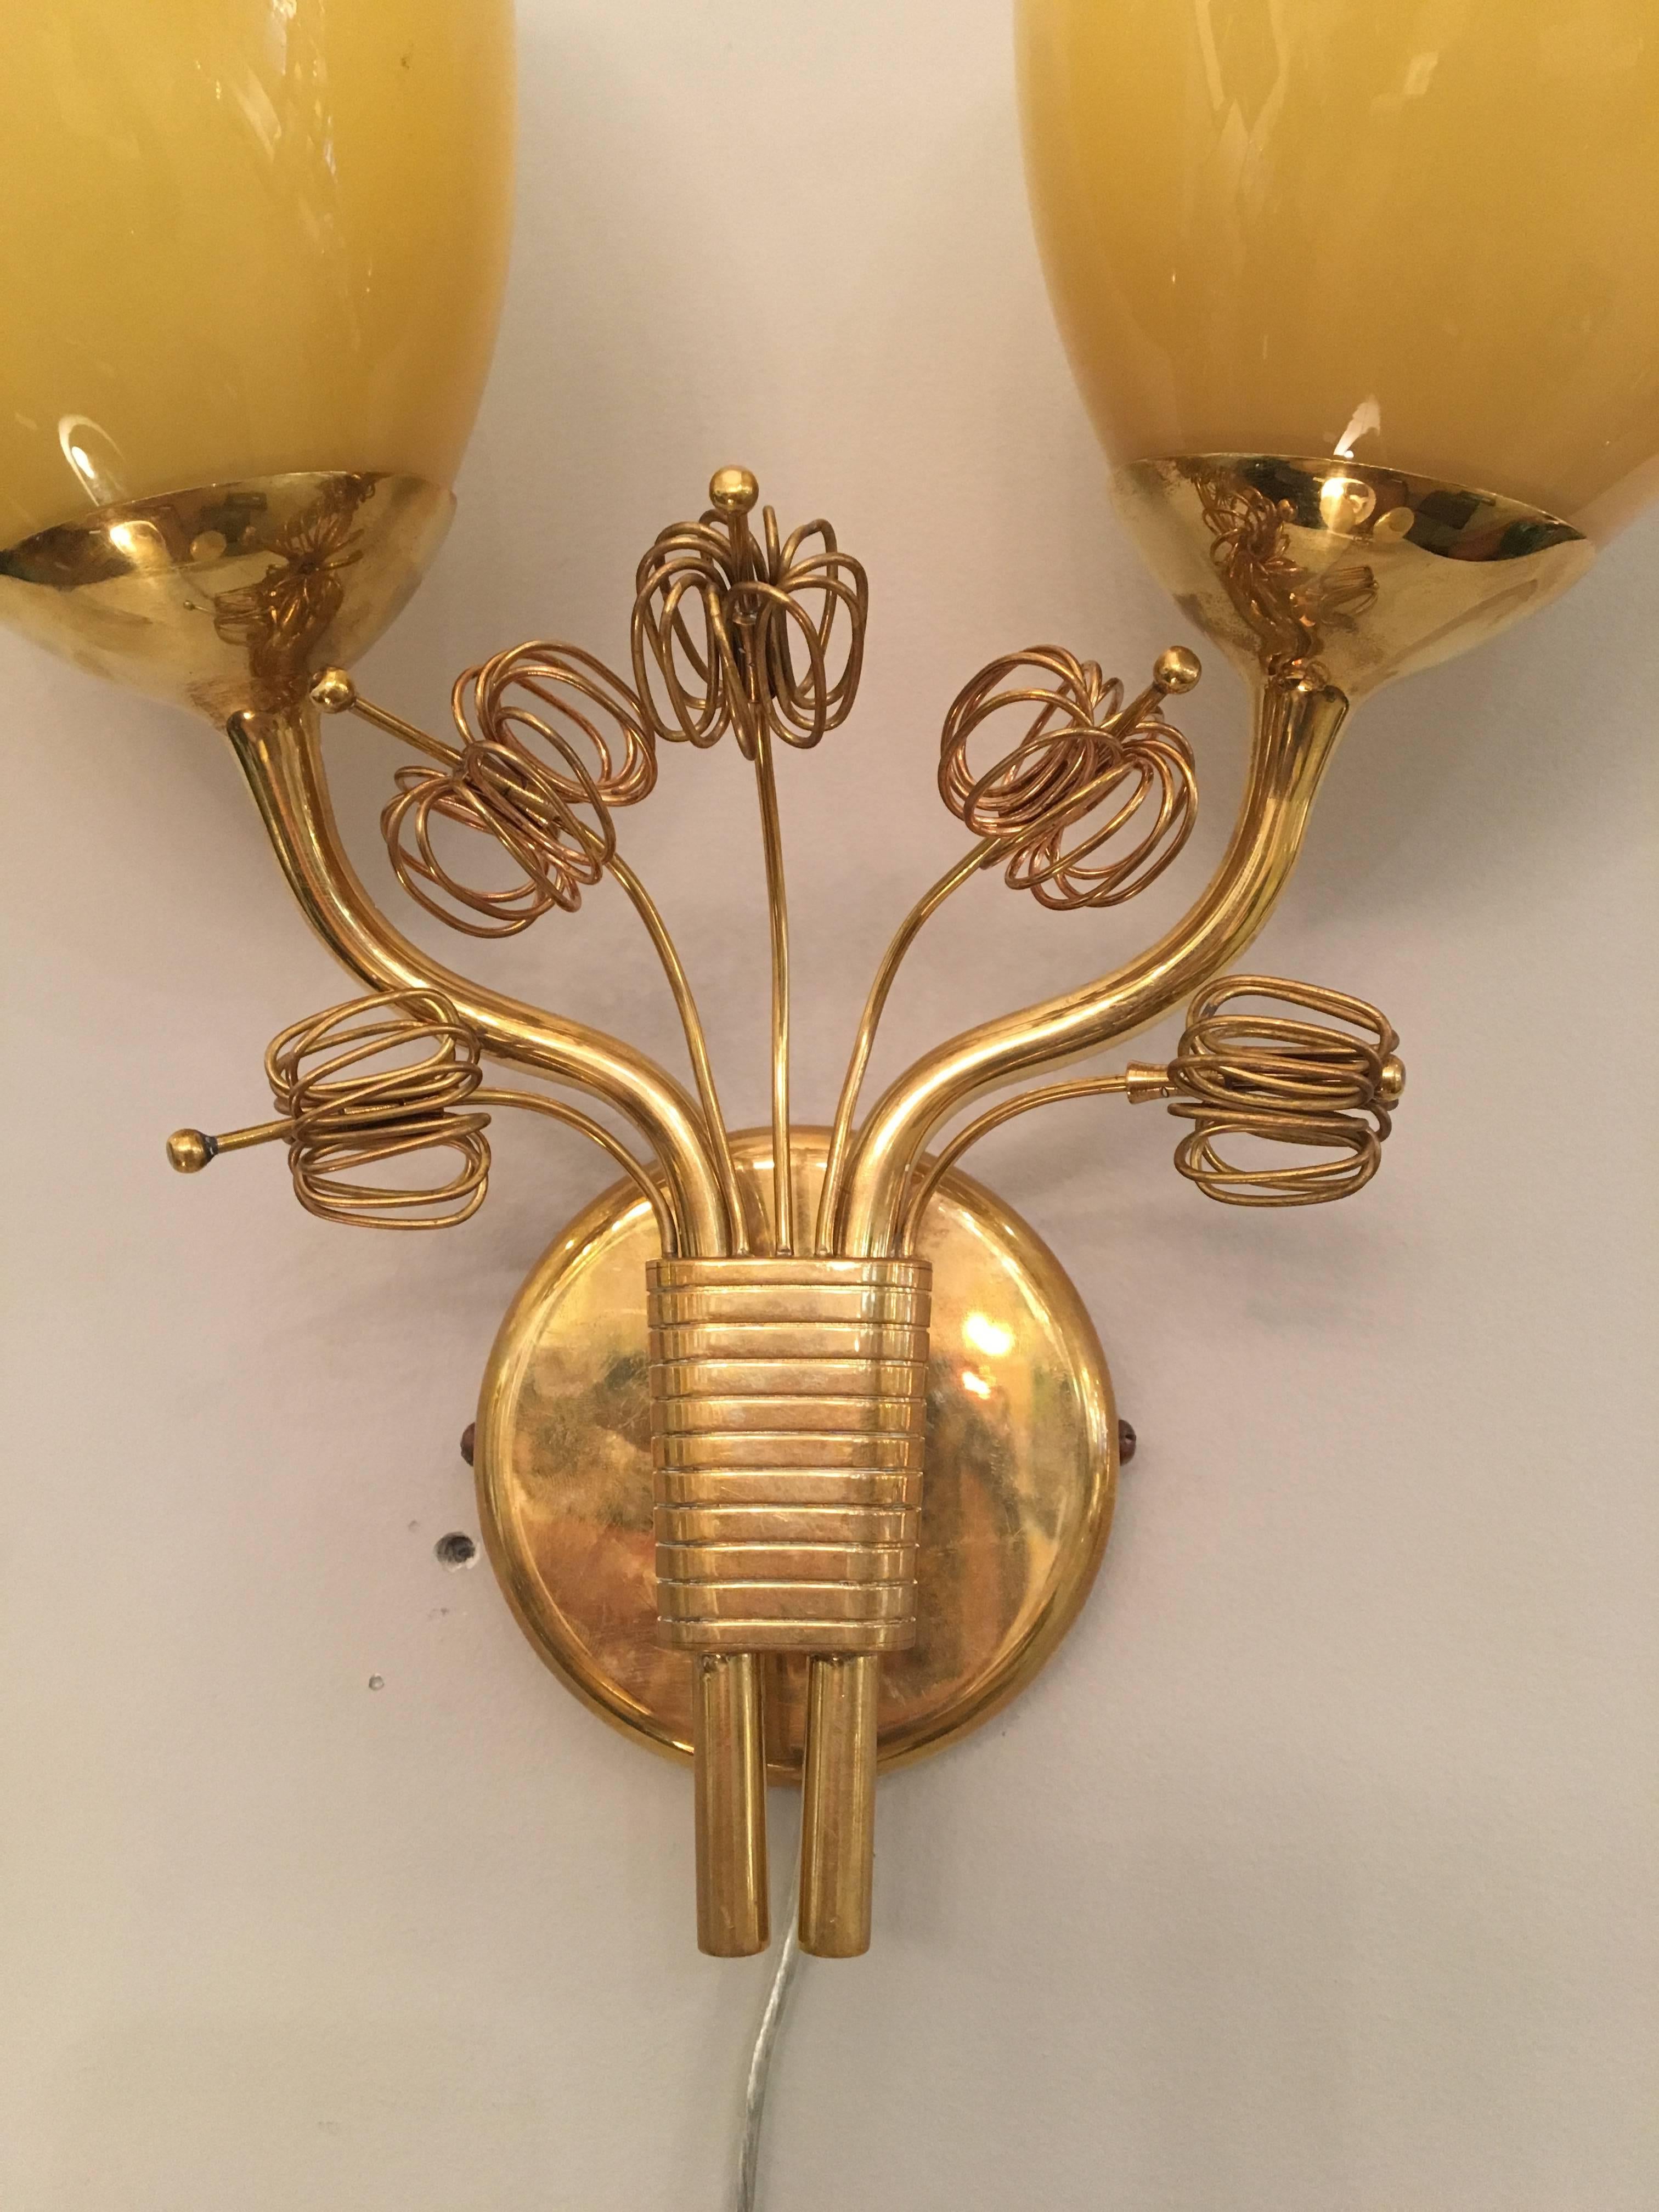 Rare pair of brass and opaline glass sconces by Paavo Tynell for Taito Oy, 1940s.
Sconces have been newly rewired and could be polished upon request.